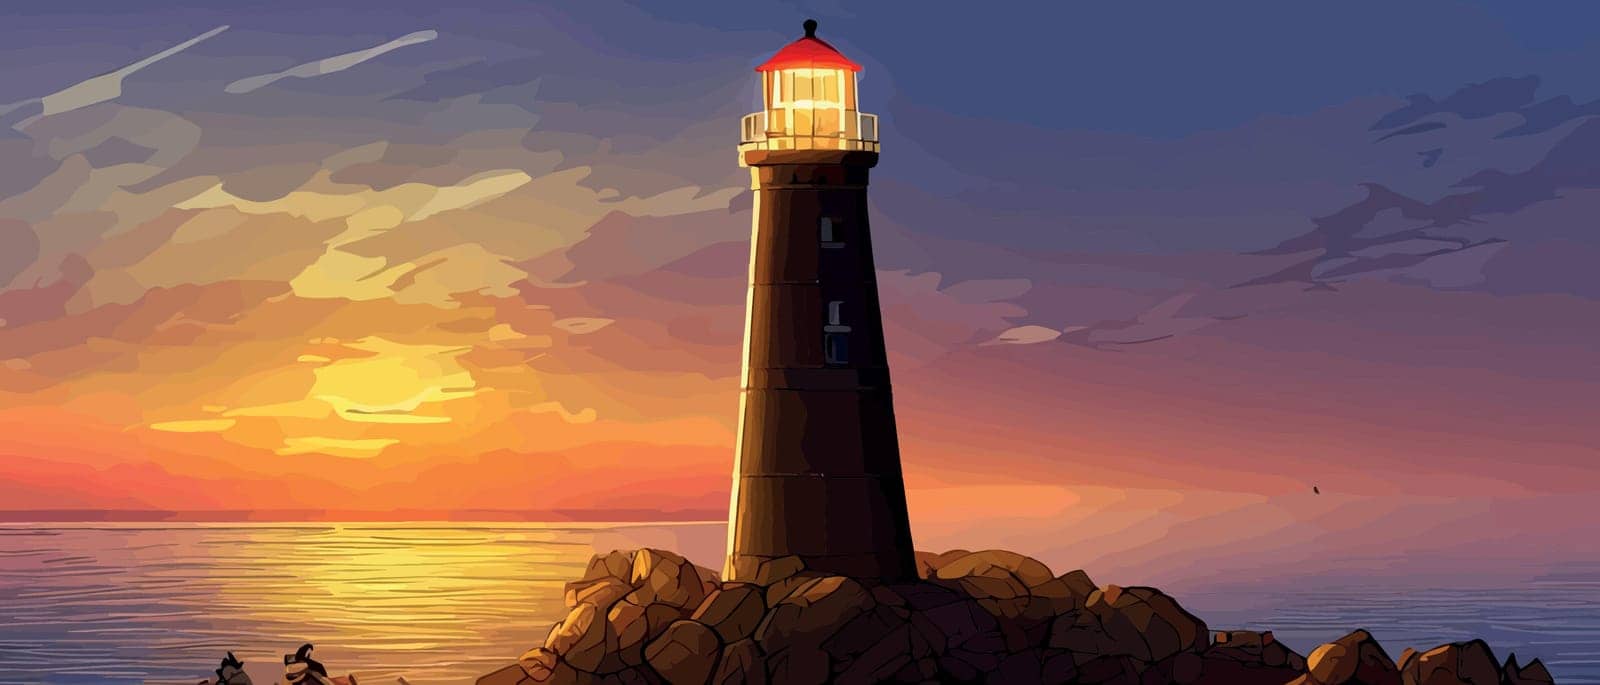 Illumination from the lighthouse from mainland, moon on background or sunset, vector background, vector drawing by hand and digital illustration, created without a reference image.